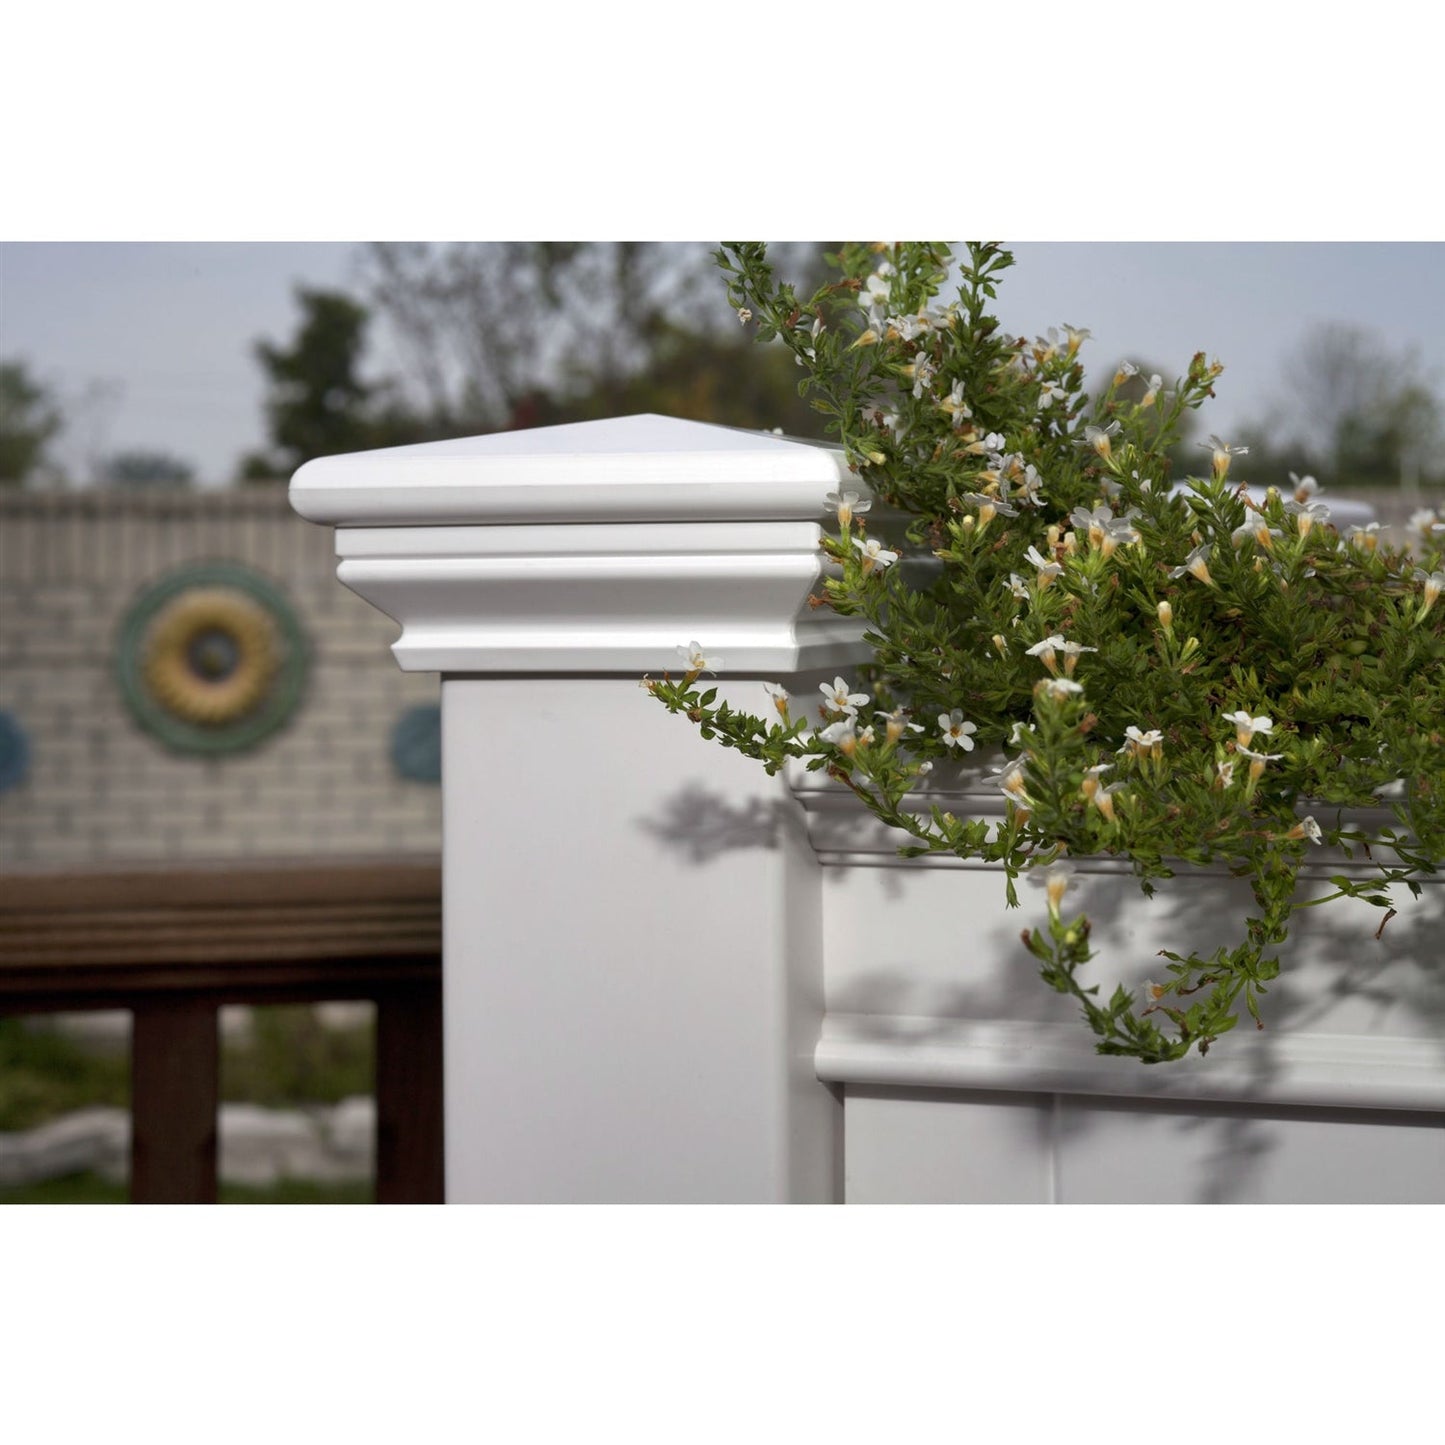 Outdoor > Gardening > Planters - Elevated Planter Raised Grow Bed In White Vinyl